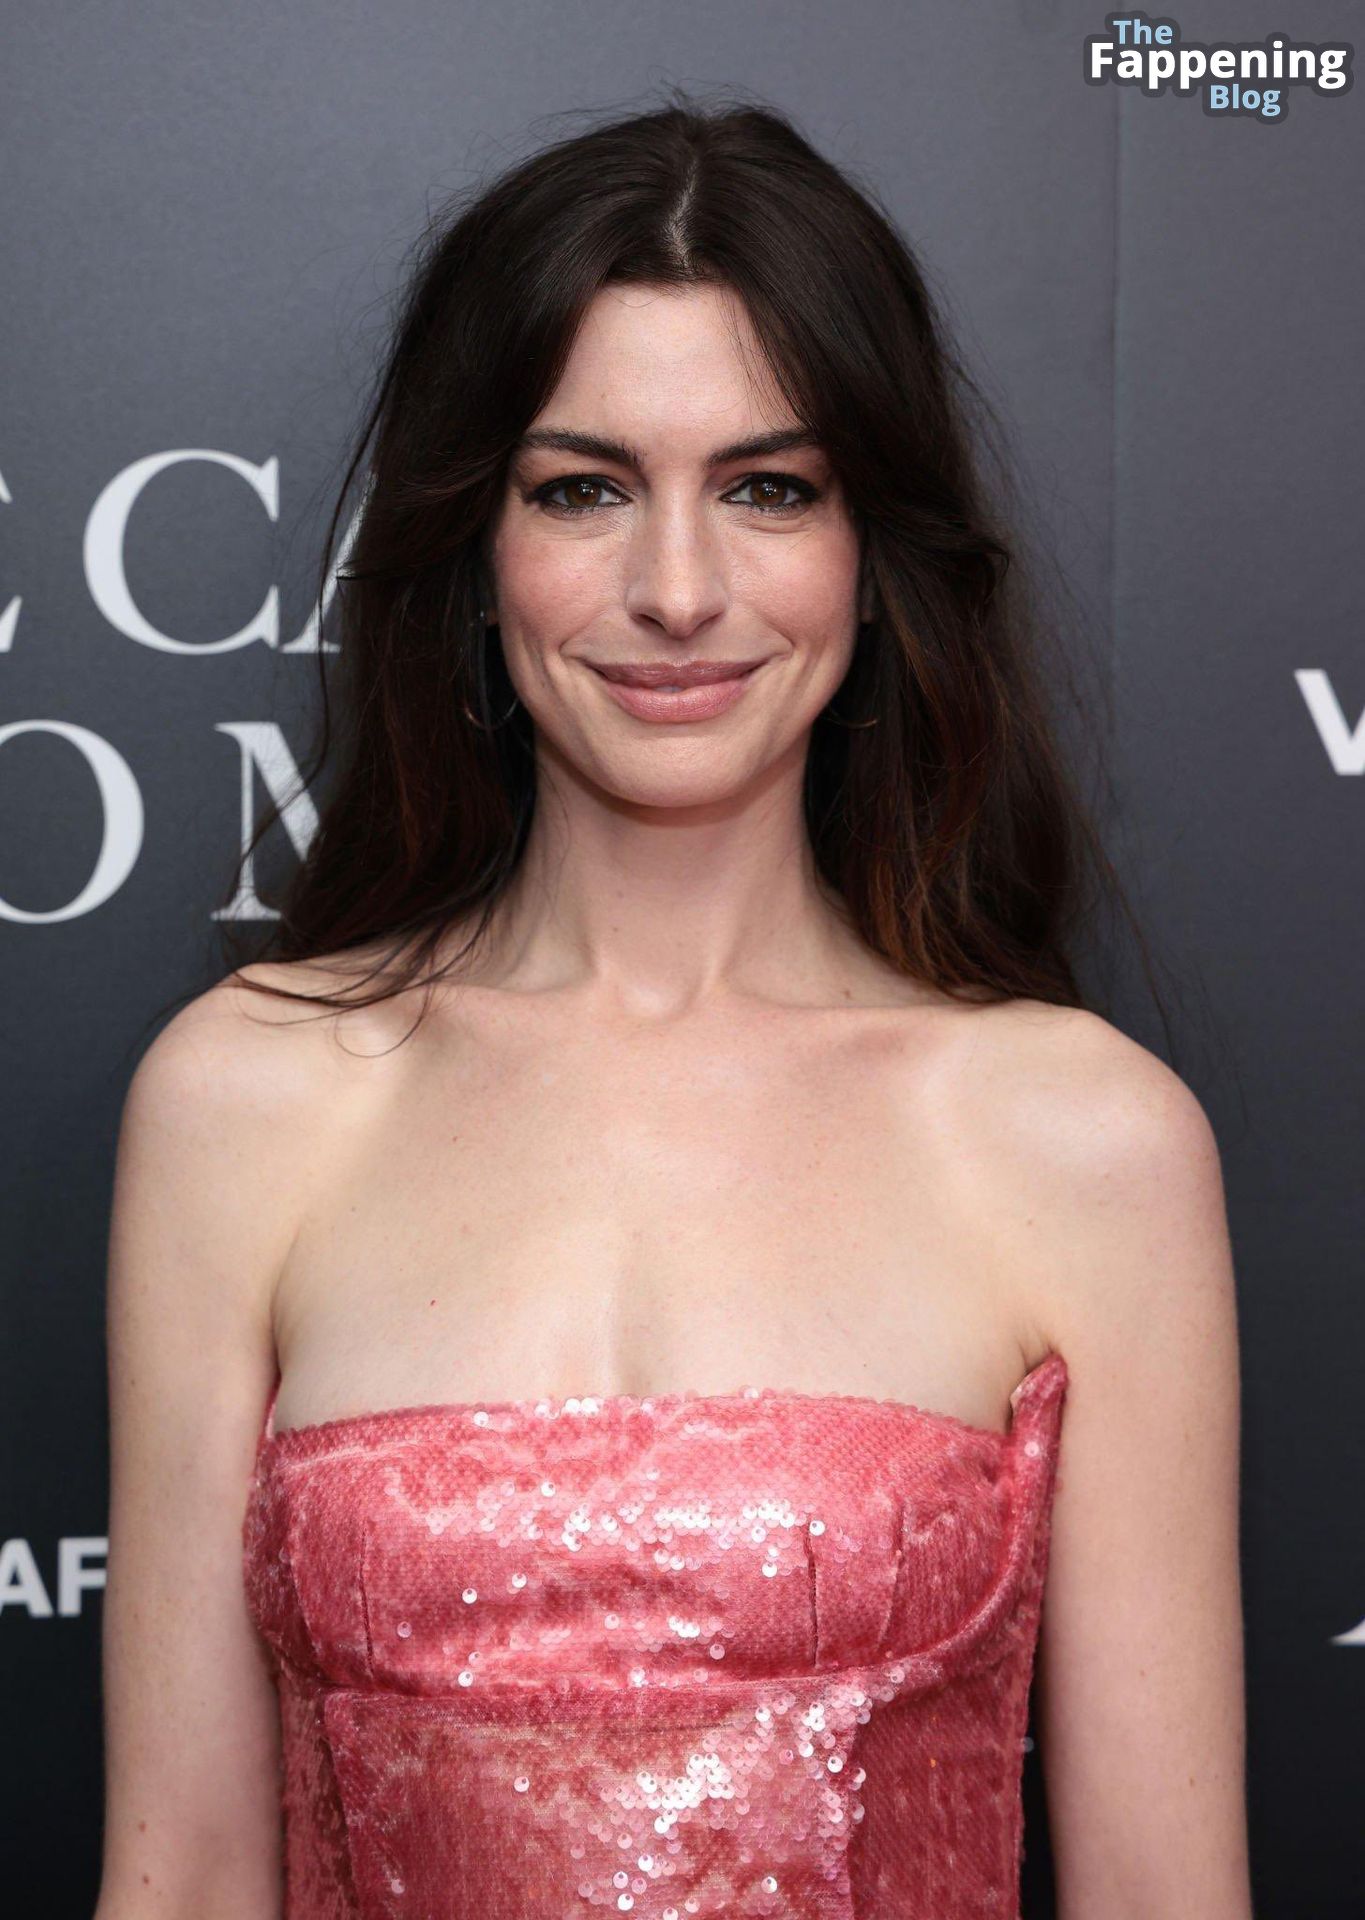 Anne-Hathaway-Sexy-4-The-Fappening-Blog.jpg